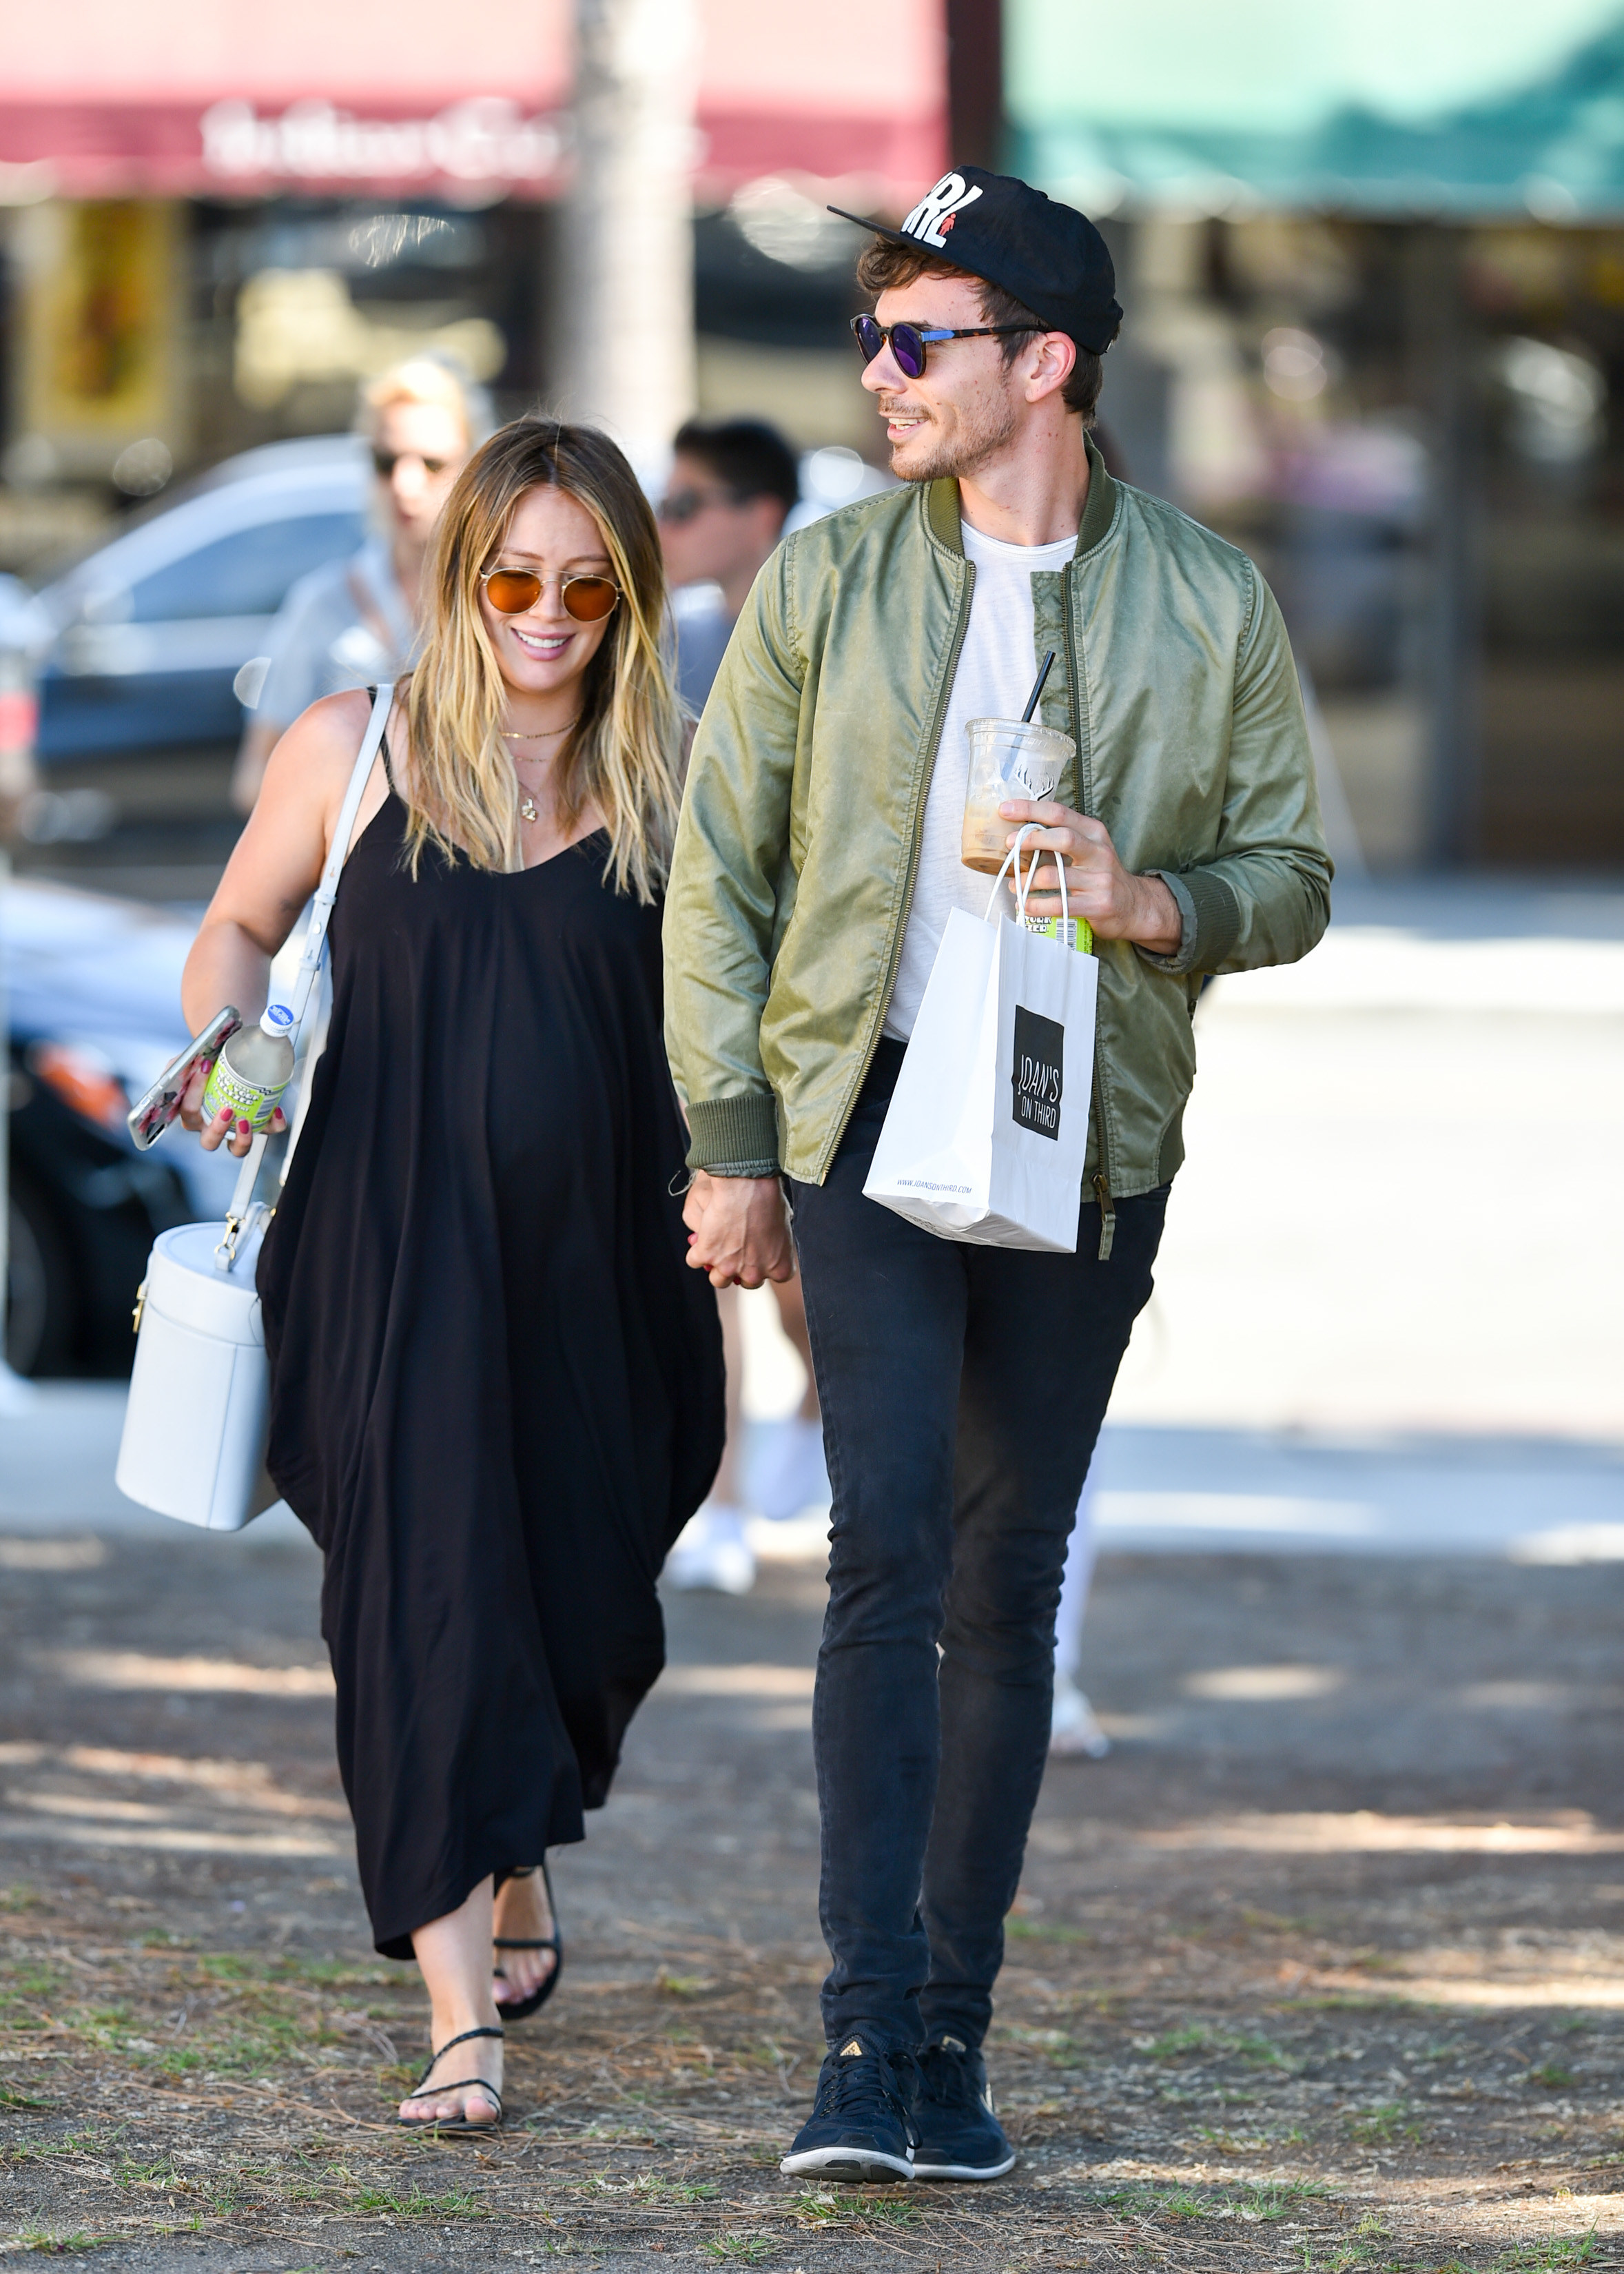 Hilary and Matthew holding hands while walking outdoors together and smiling